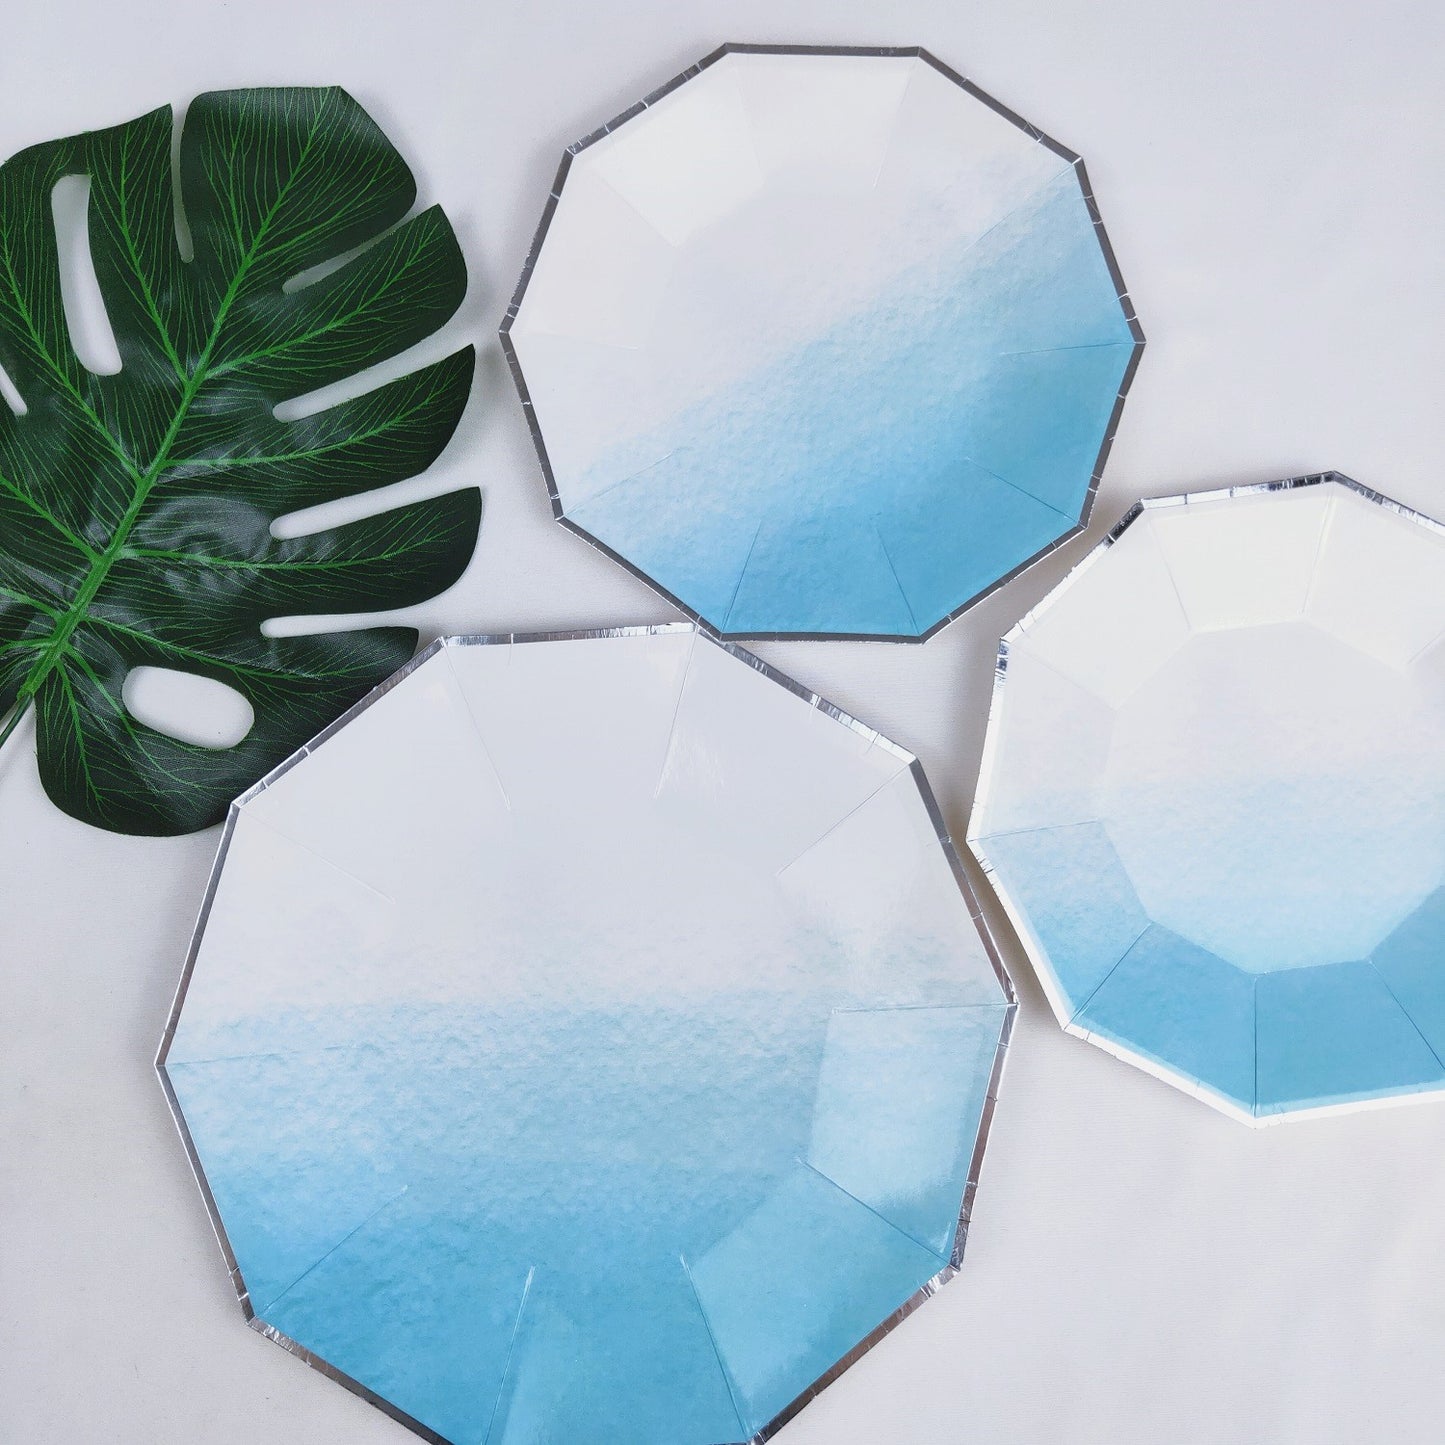 Summer Blue Ocean Party Supplies Decorations Silver Rim Decagon Paper Plates and Cups and Napkins Tableware Sets for 8